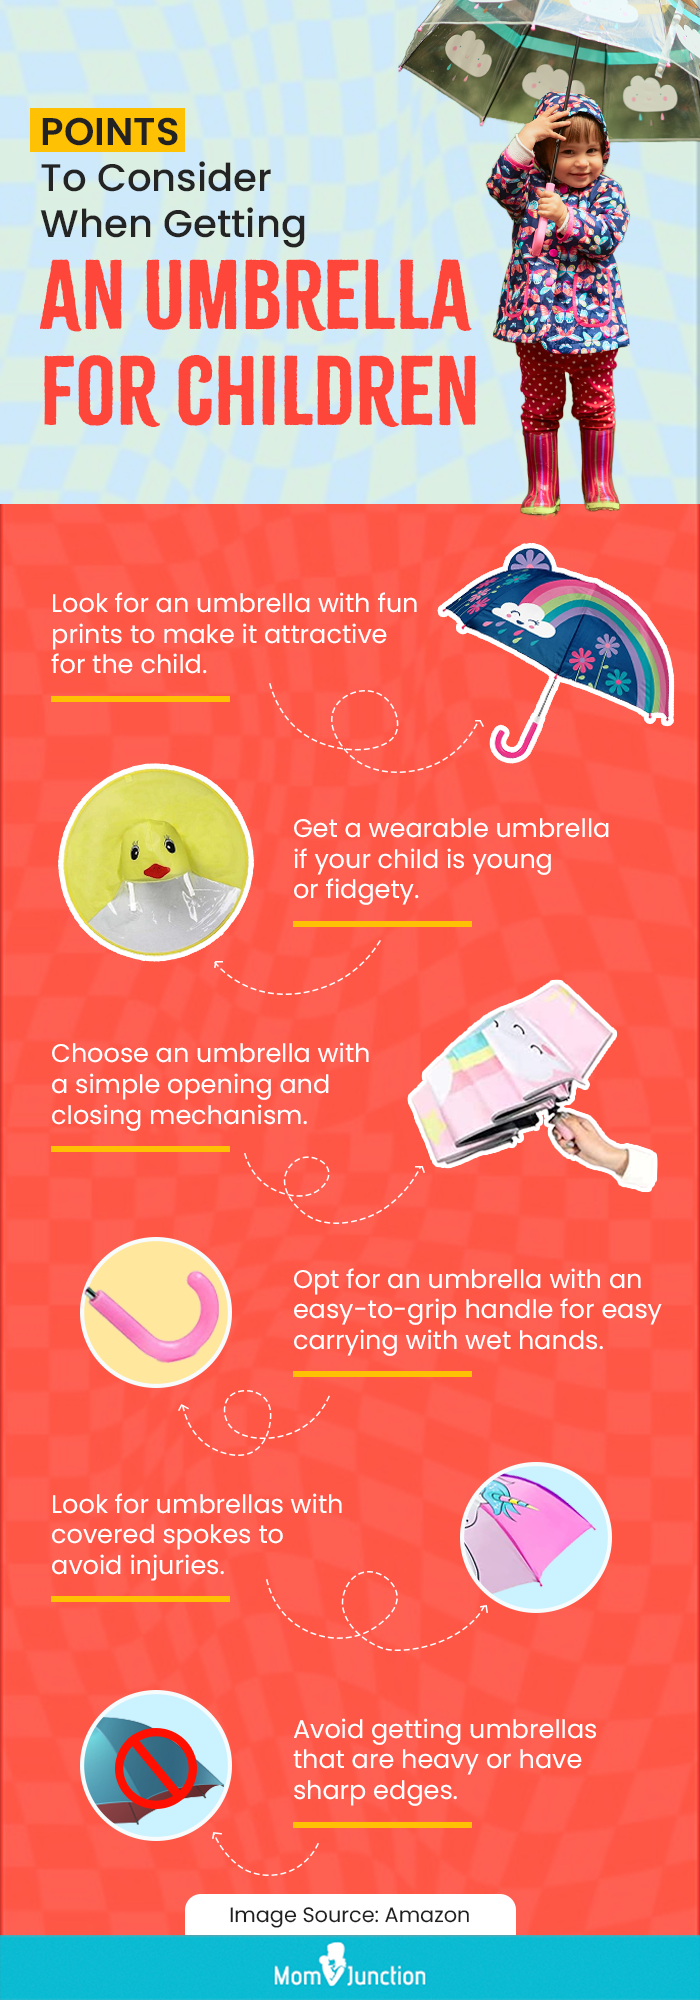 Points To Consider When Getting An Umbrella For Children (infographic)